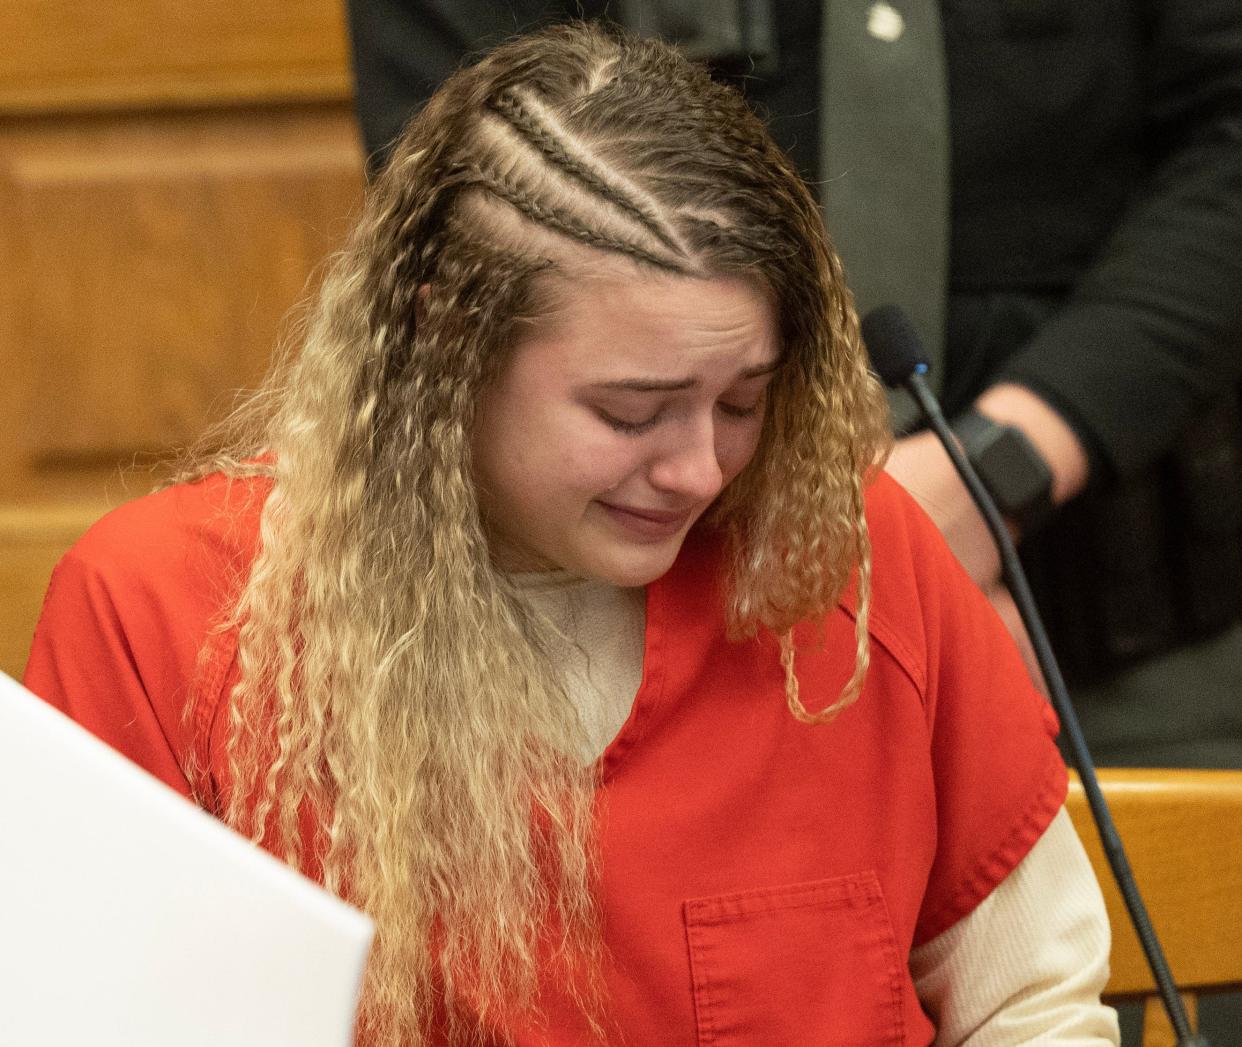 Grace N. DeWalt, 21, of Massillon becomes emotional as her mother speaks Tuesday on her behalf. Stark County Common Pleas Judge Frank G. Forchione sentenced DeWalt to 10 to 13.5 years in prison for attempted murder and other charged tied to an October shooting.